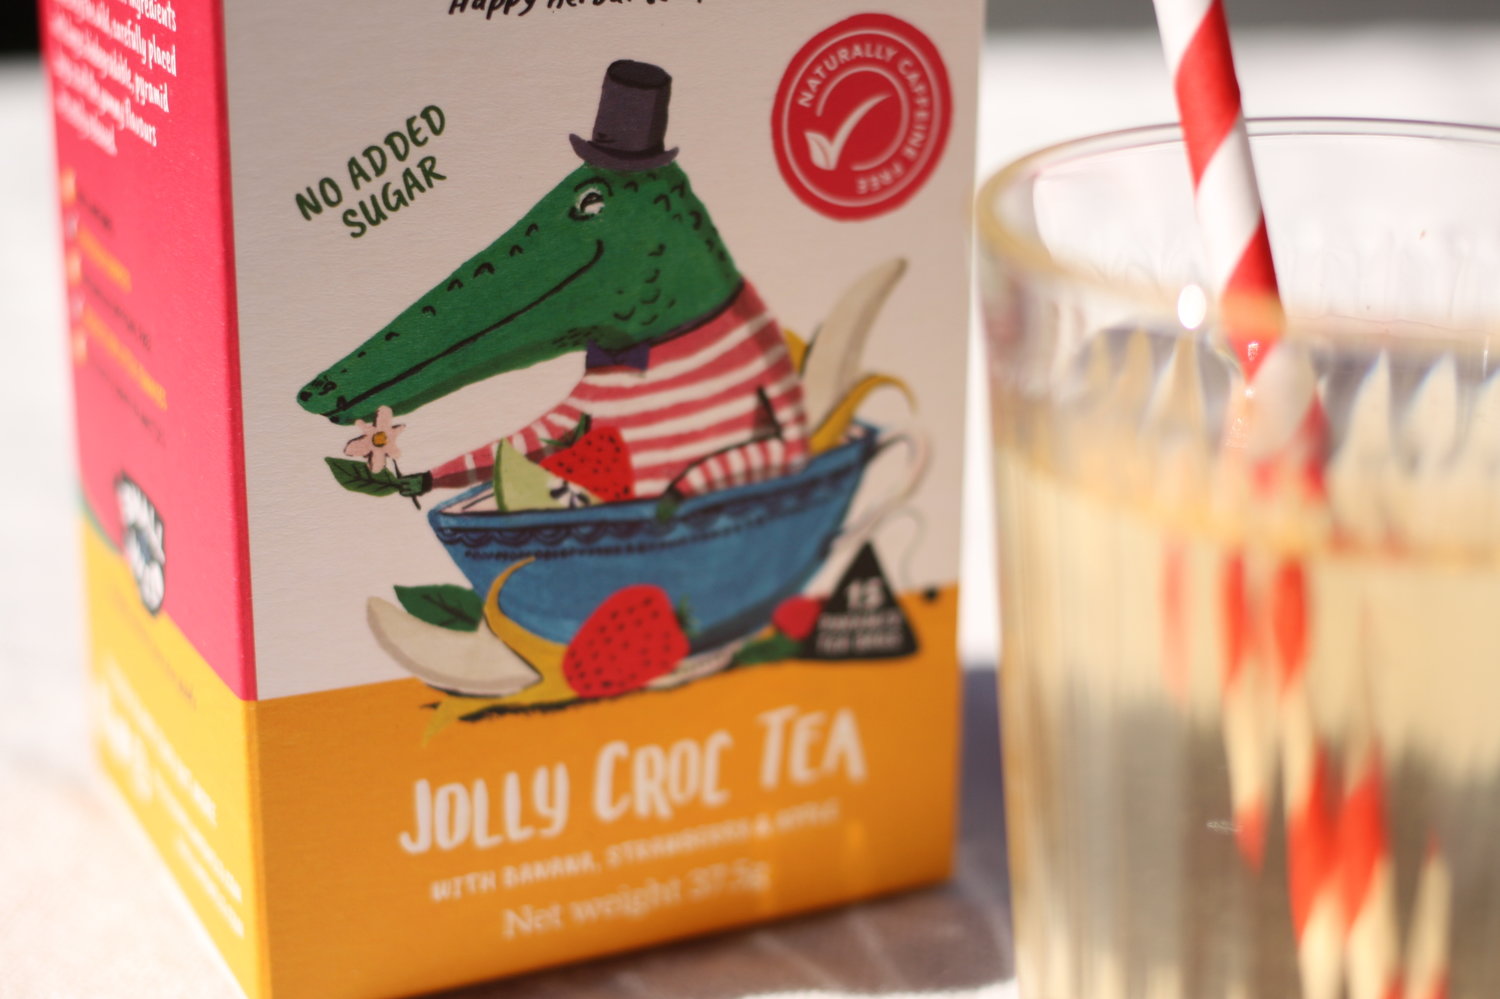 Jolly Croc fruit iced tea with banana and strawberry in glass with straw